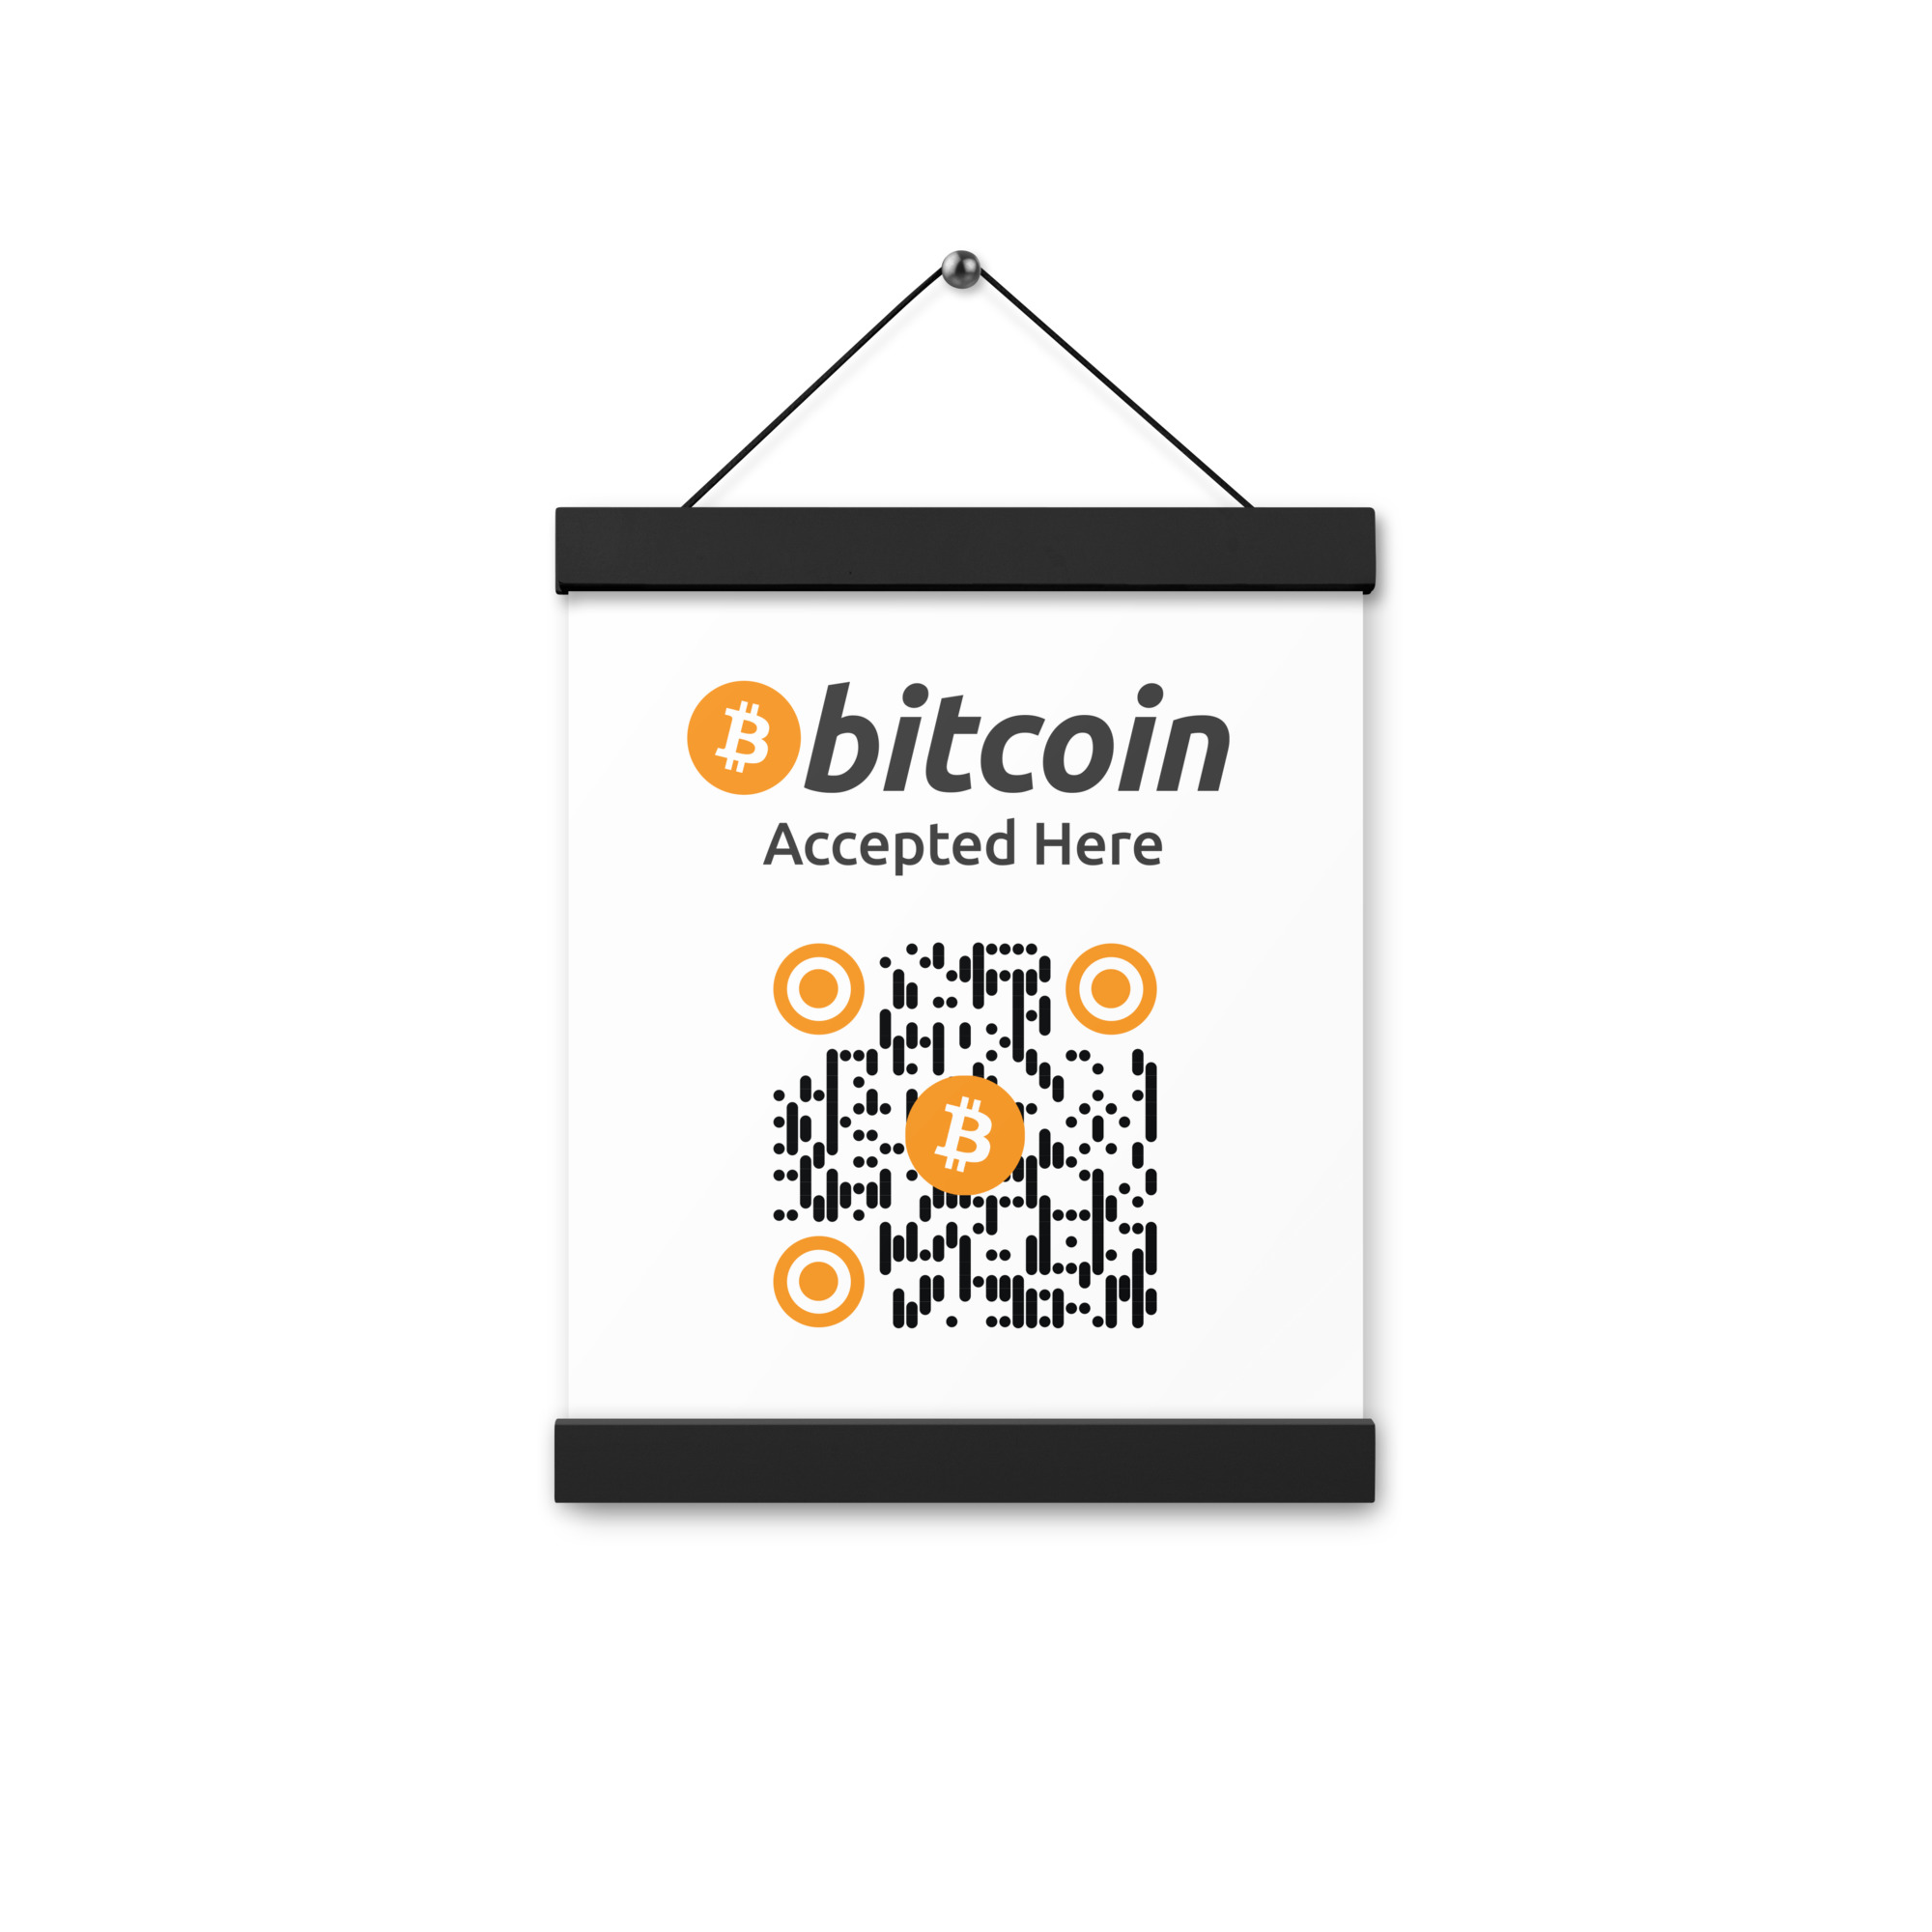 Bitcoin Accepted Here Sign - Hanging Poster - Black Color Trimming